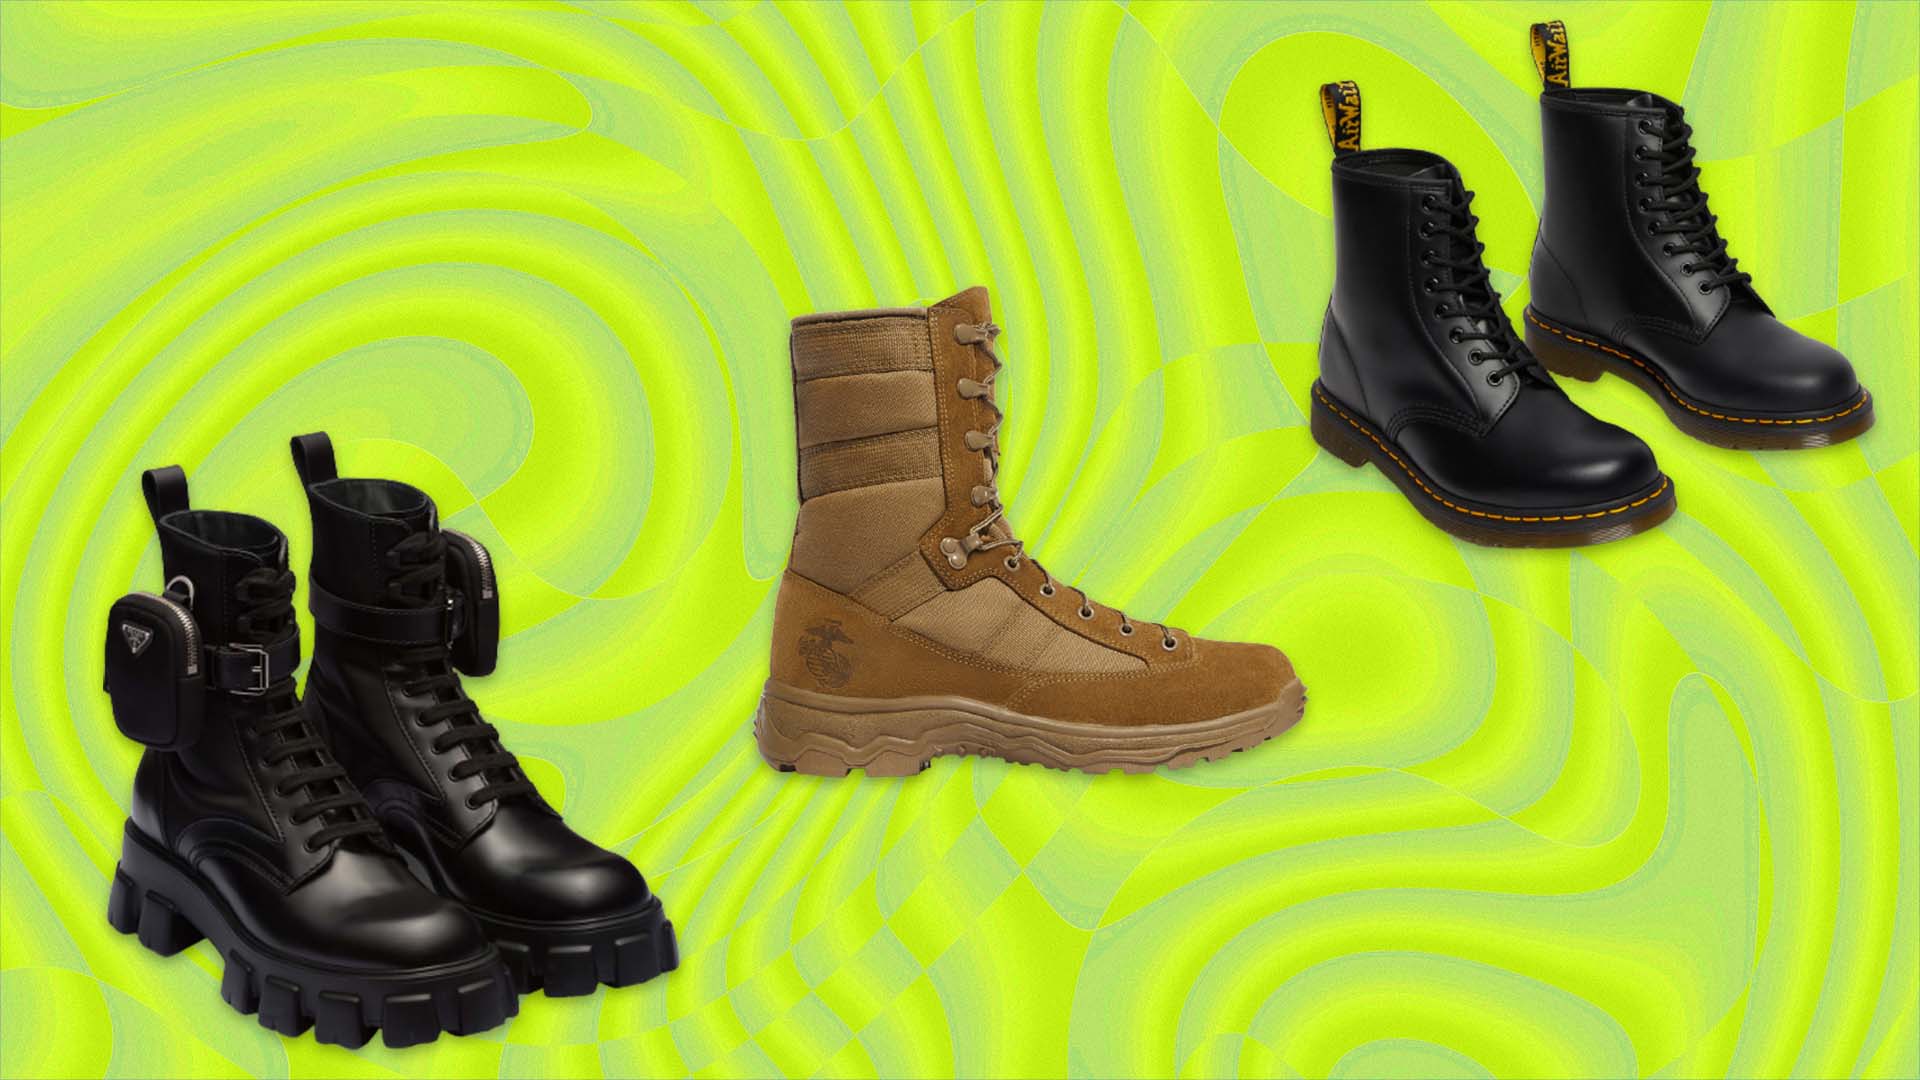 COMBAT BOOTS WISH LIST FAVES